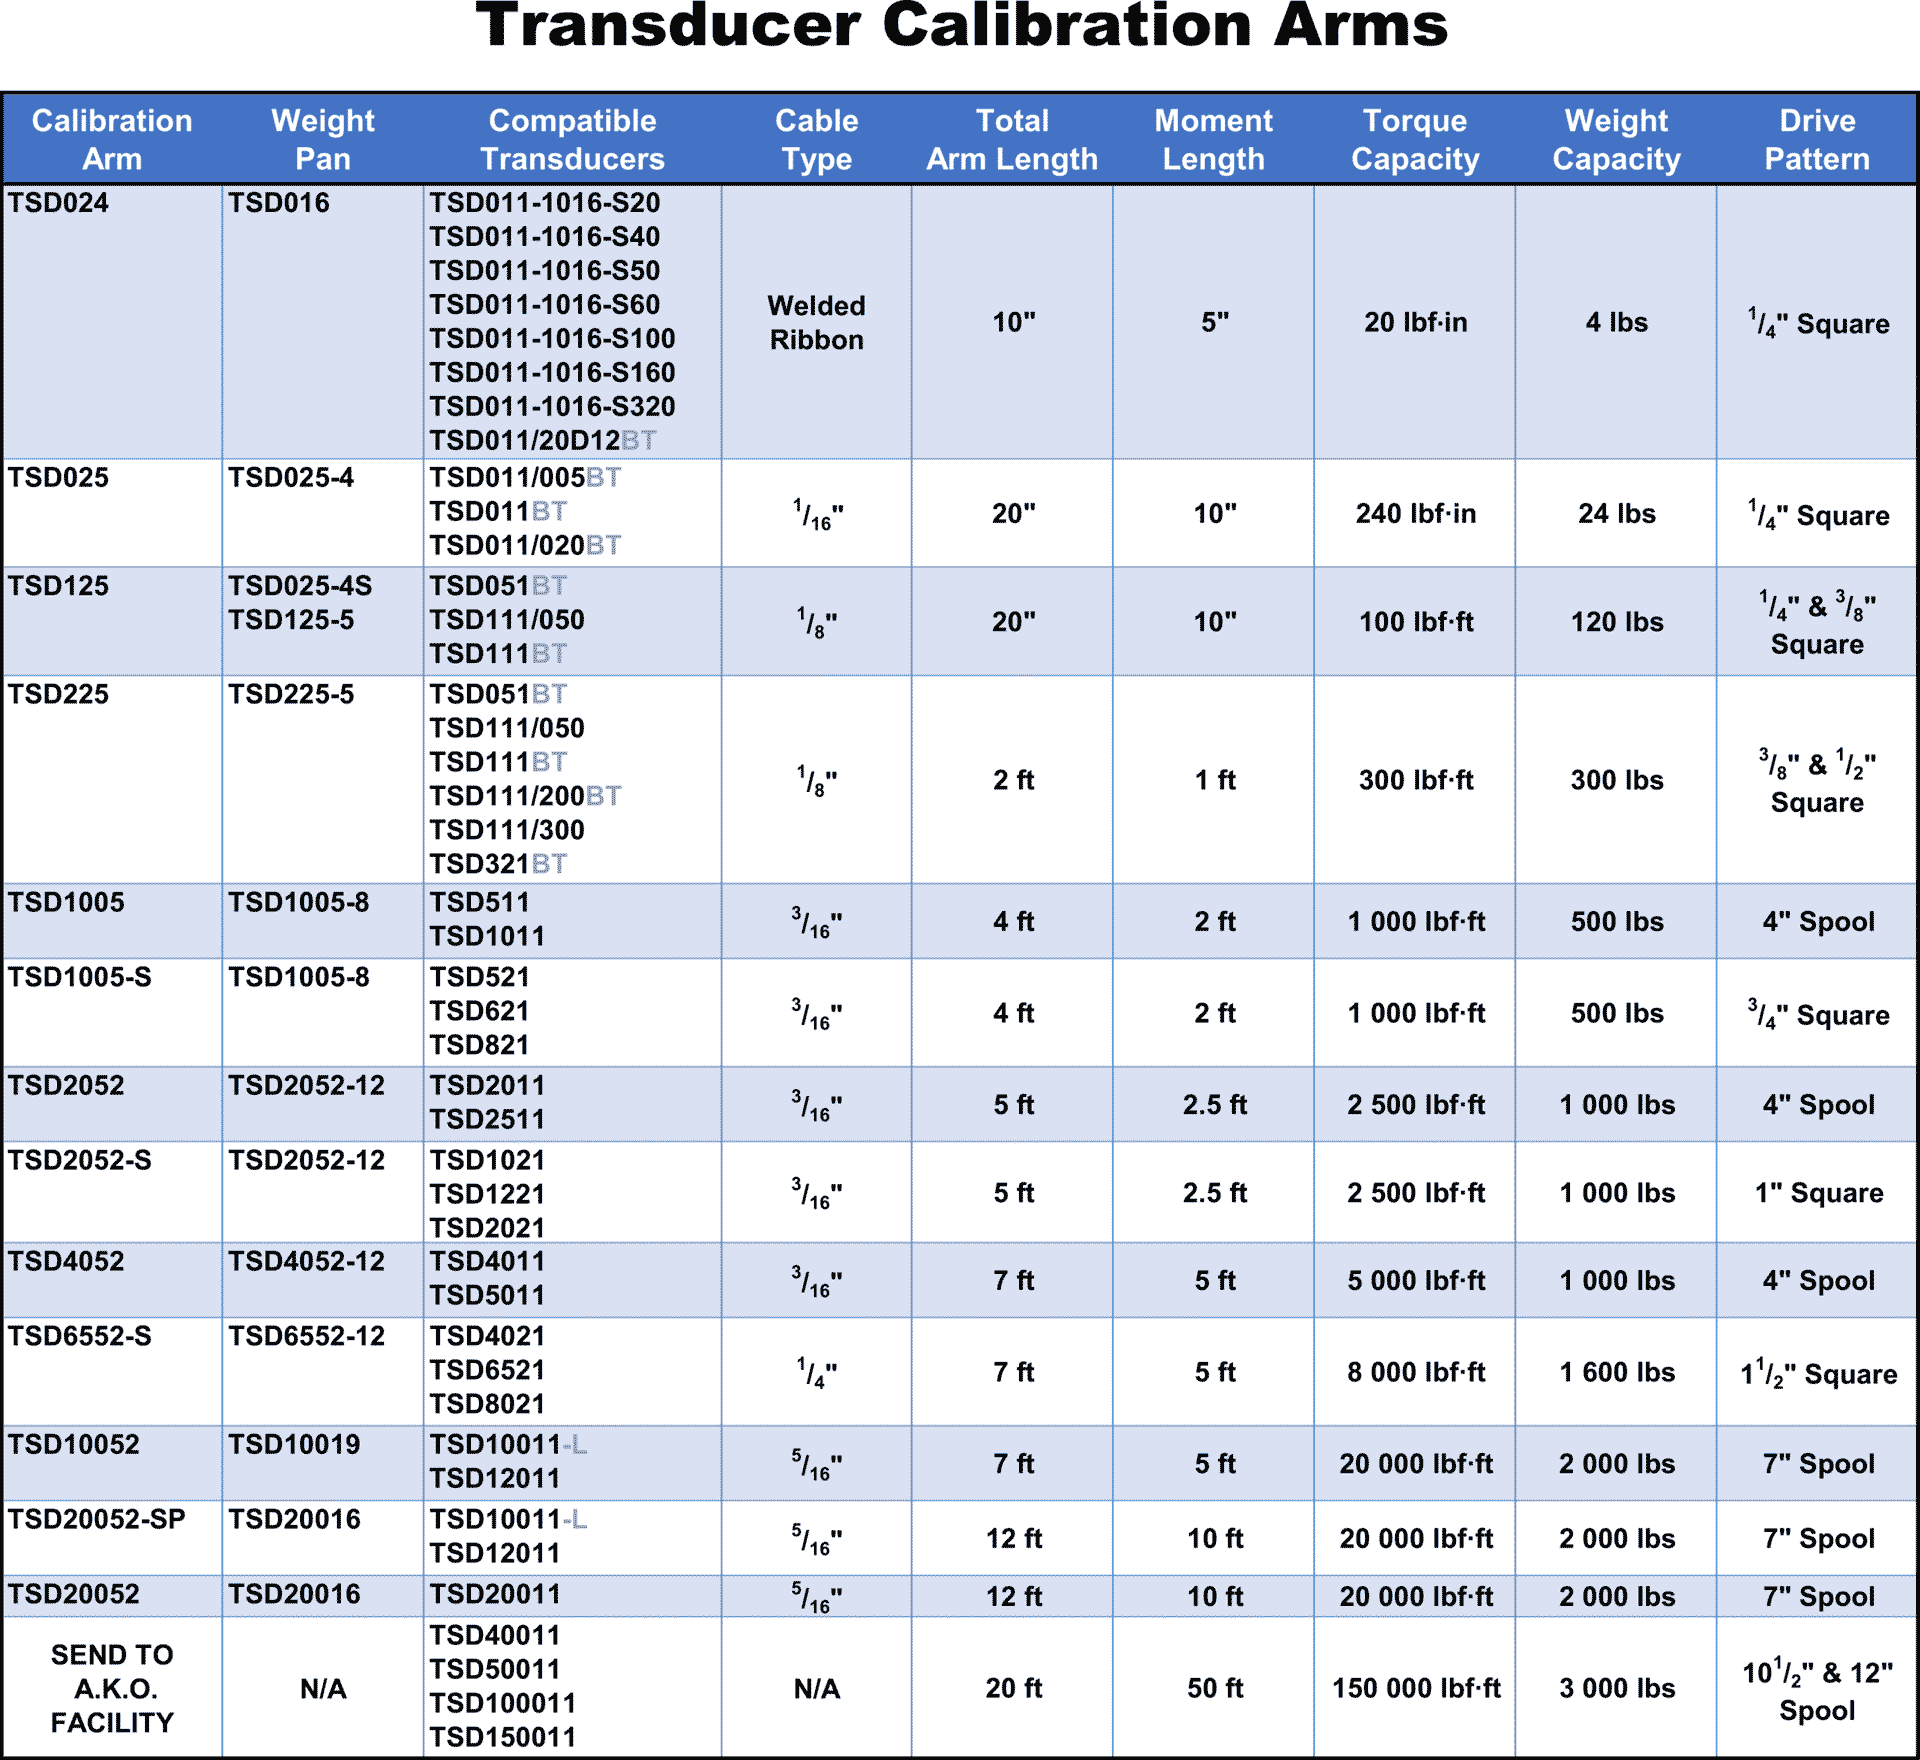 Information about our calibration arms torque transducer calibration equipment can be viewed in this chart, including cable type, torque capacity, and more